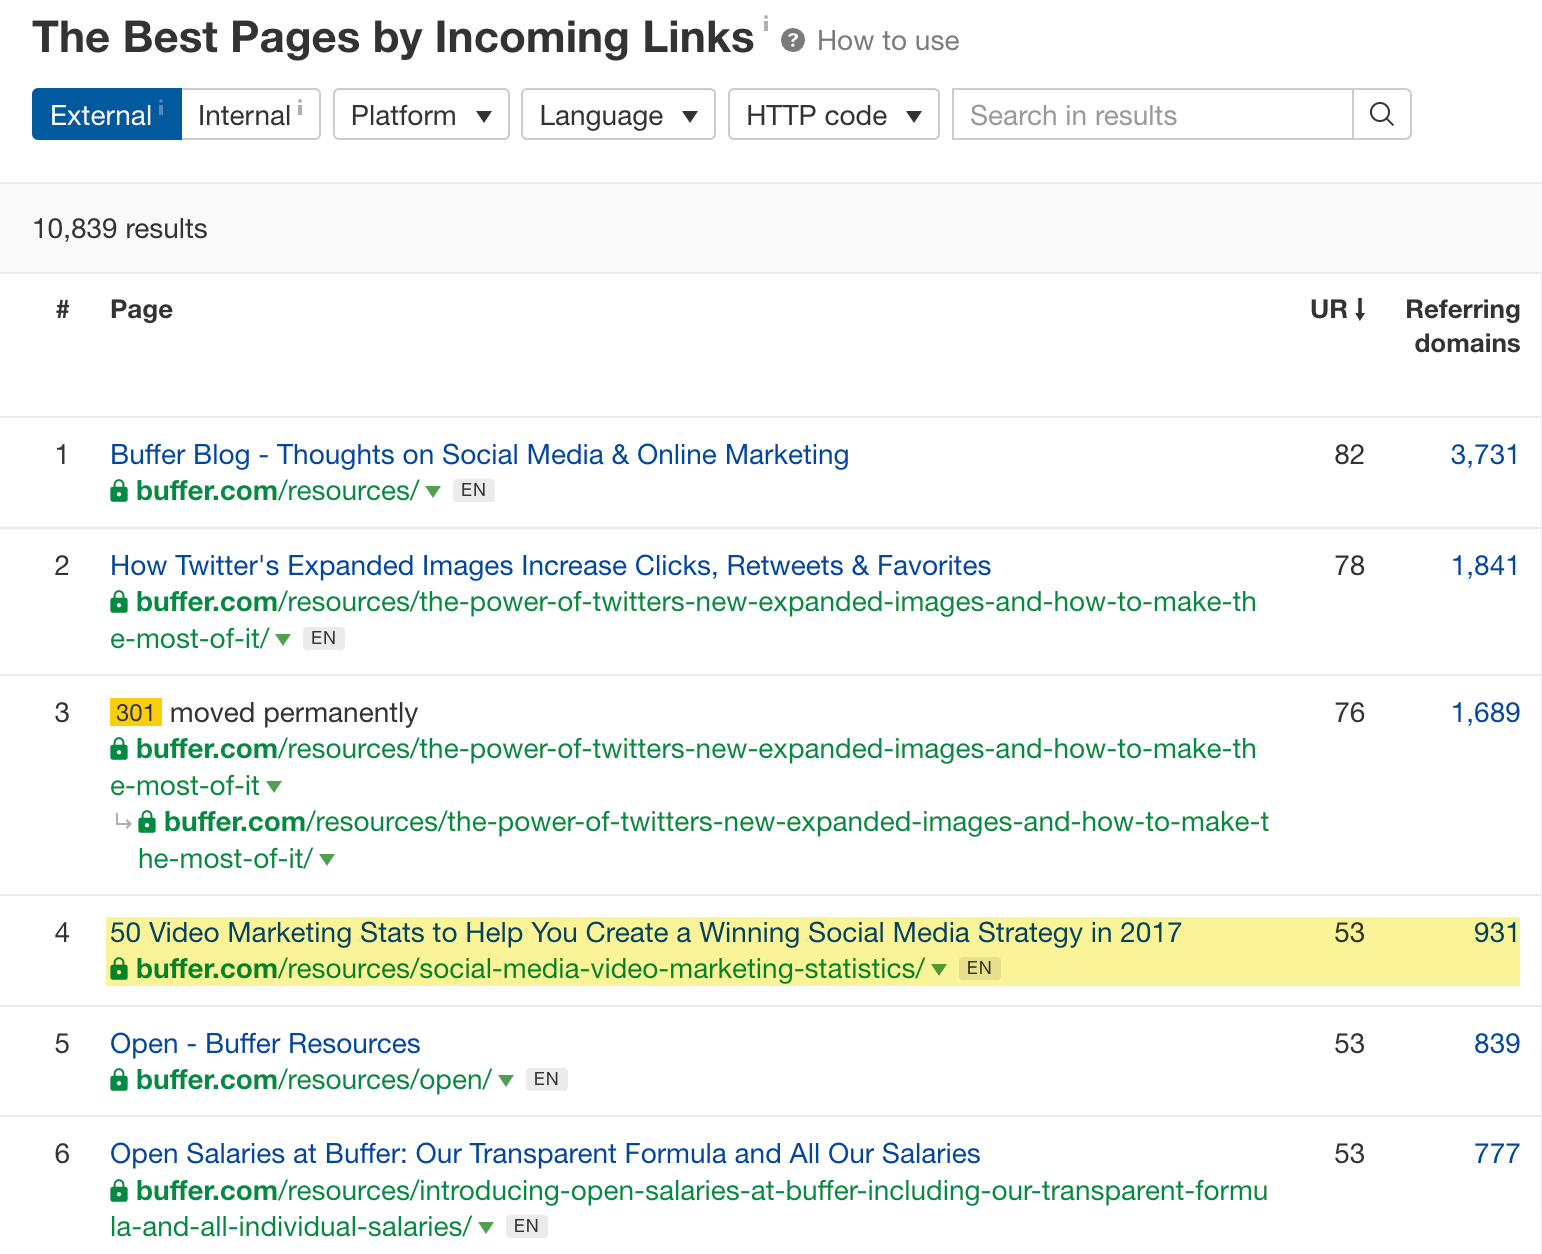 Best by links report showing six pages with the most referring domains